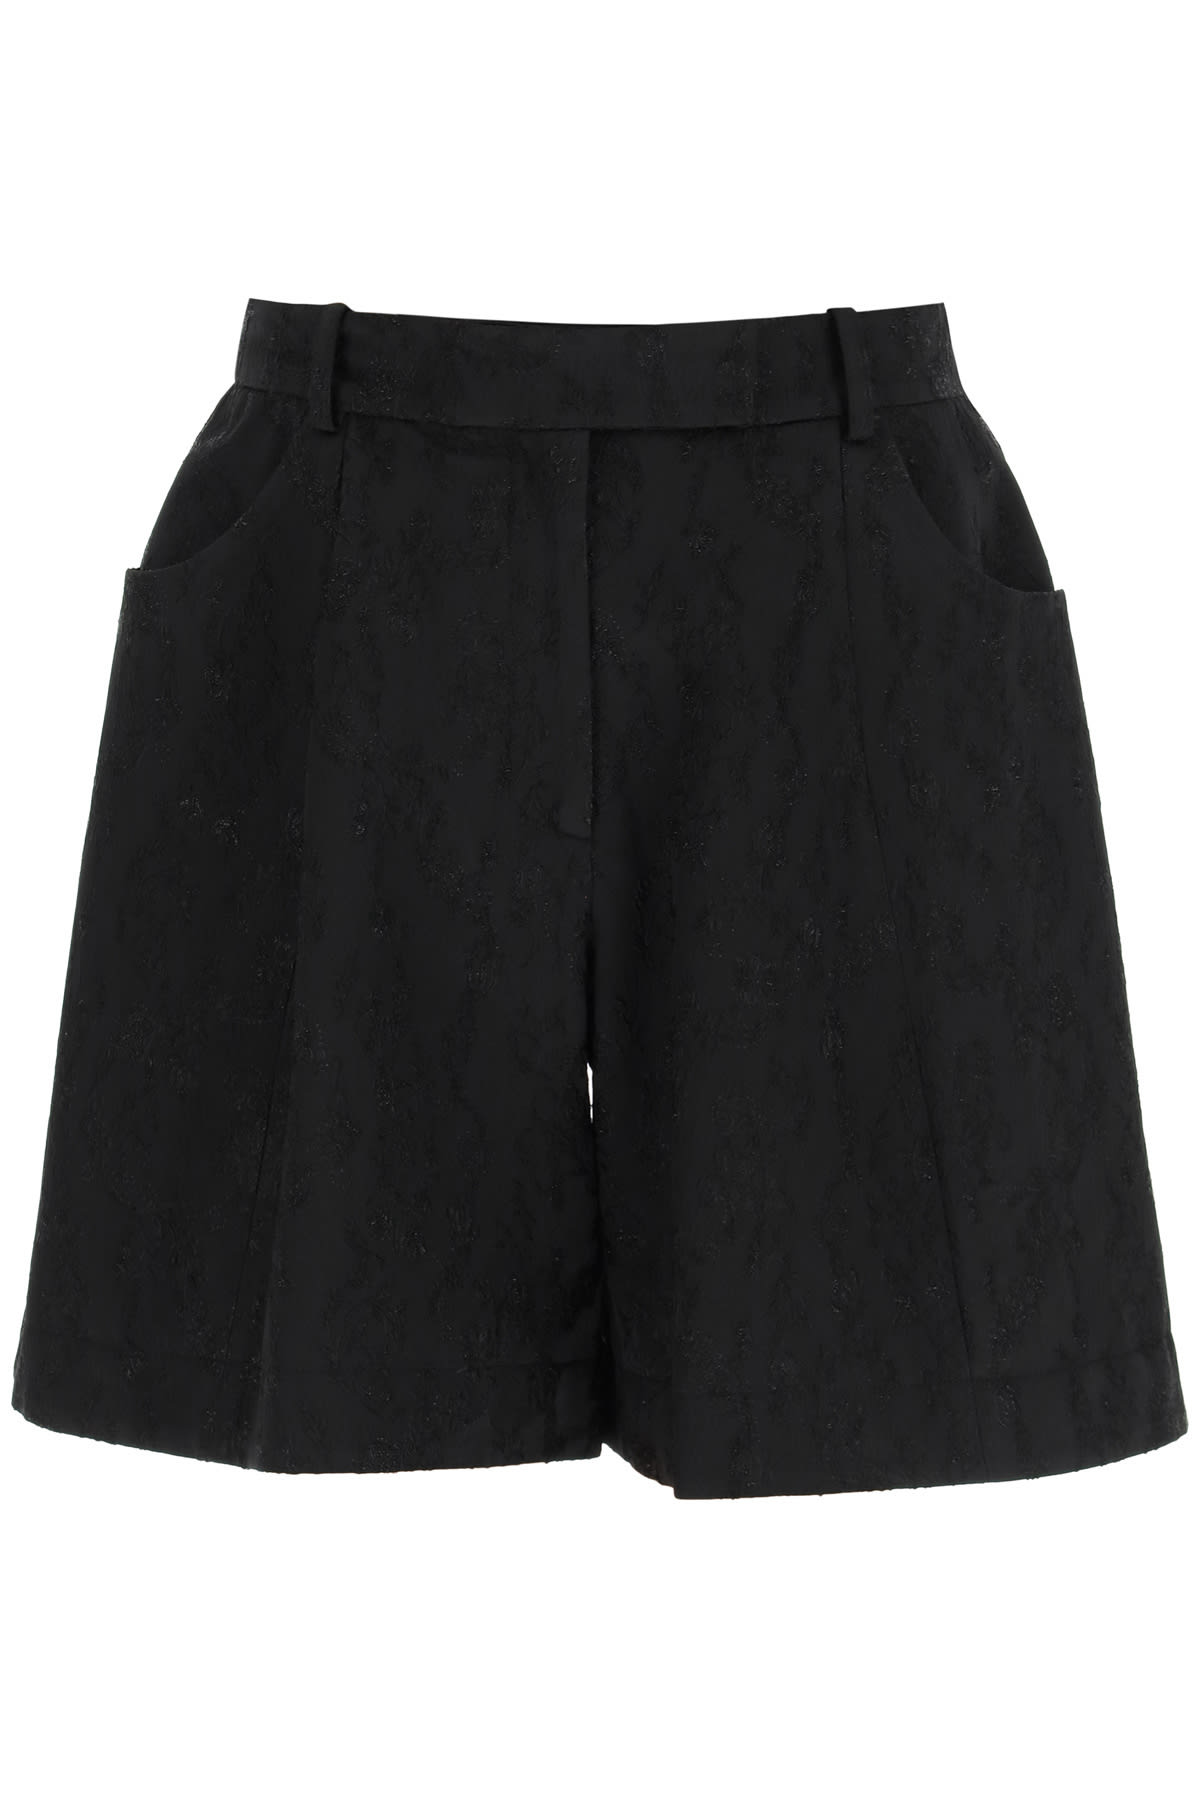 Simone Rocha Embroidered Sculpted Shorts